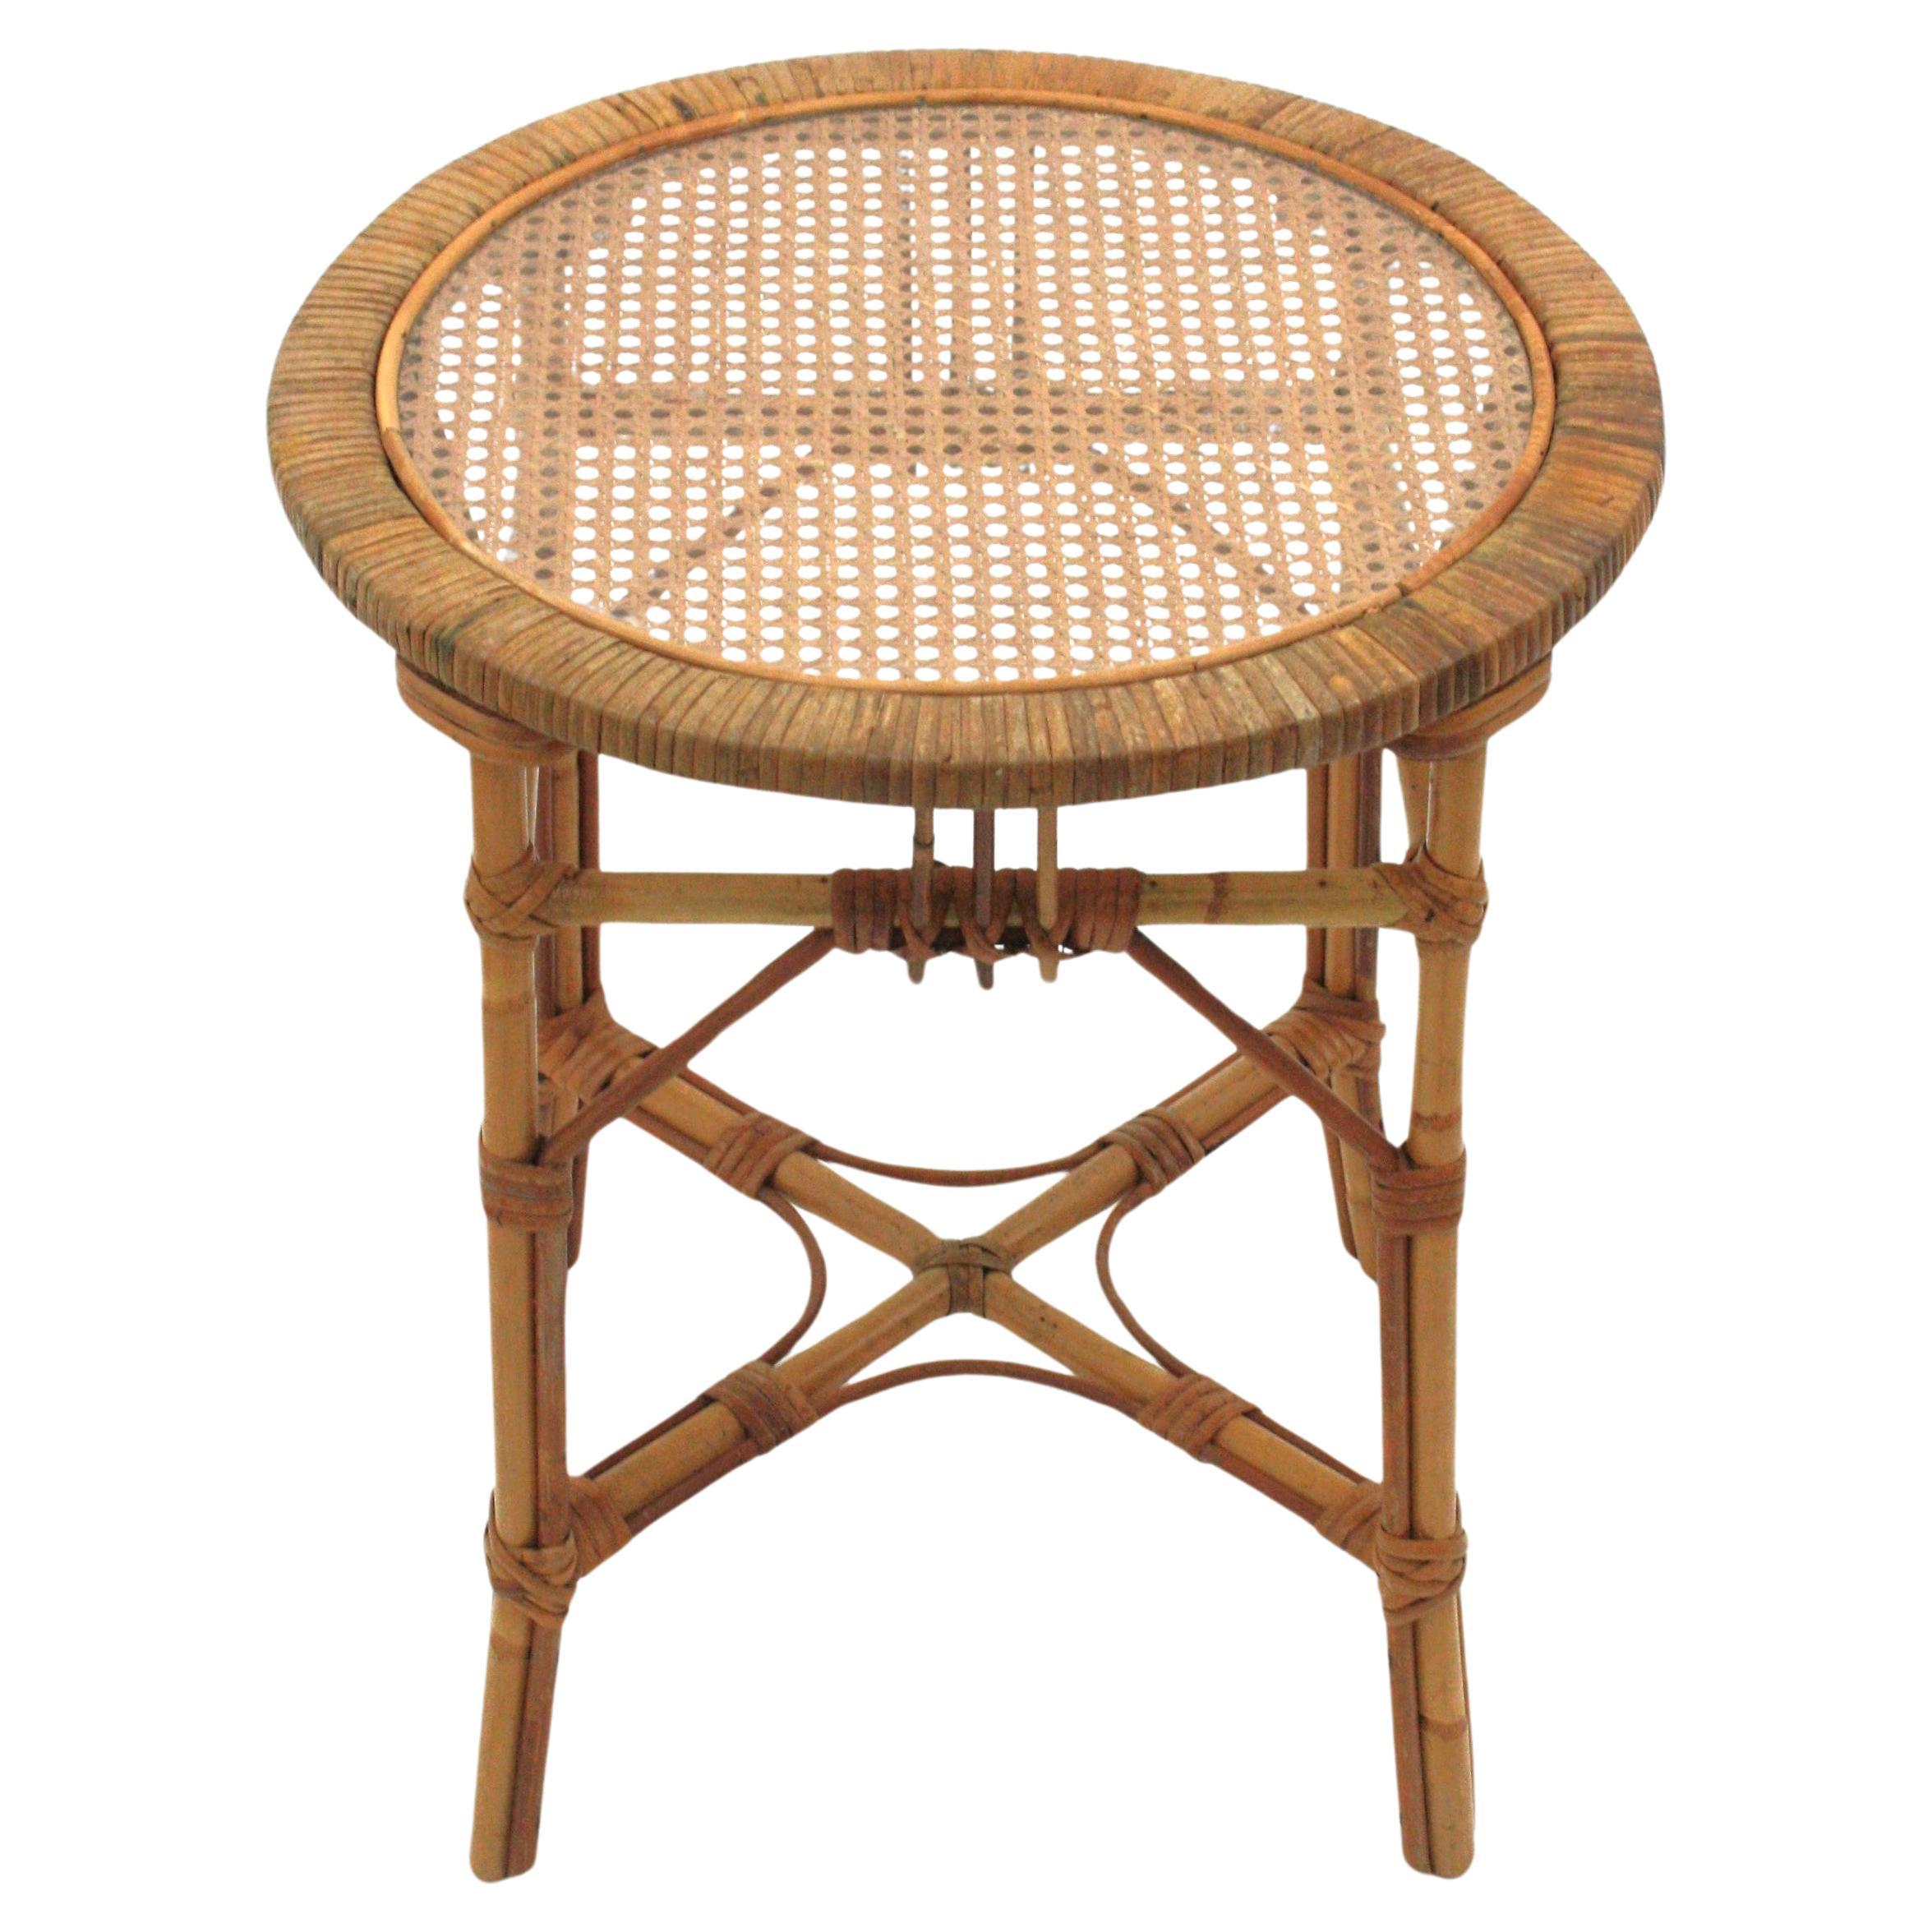 Hand-crafted rattan and woven wicker round occassional table. France, 1960s.
Eye-catching rattan table with canage and glass top.
This rattan and bamboo table has an elegant construction and all the taste of the French Riviera style.
It will be a